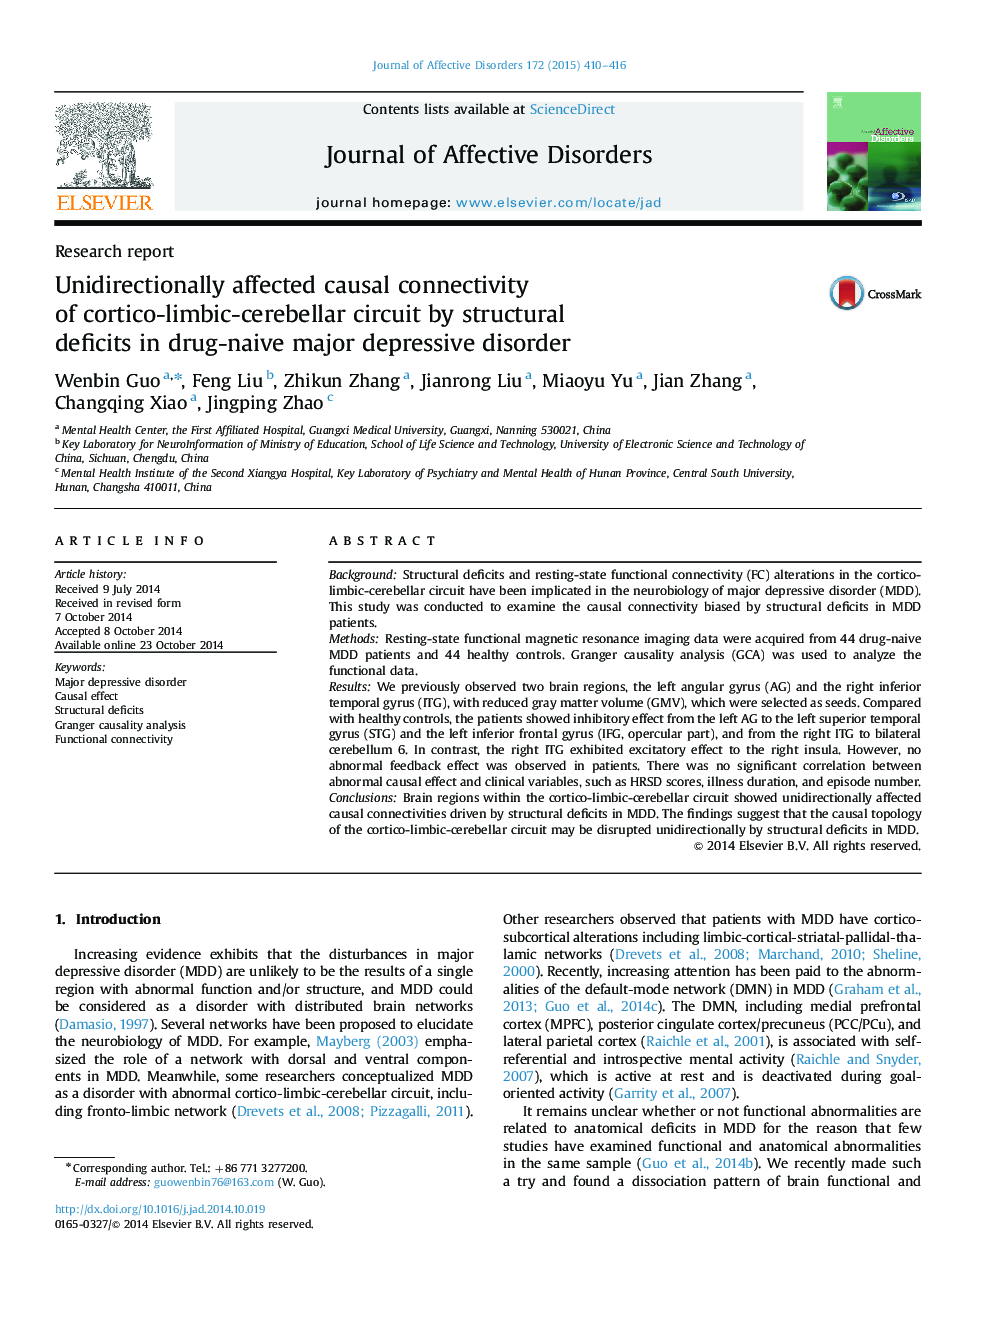 Unidirectionally affected causal connectivity of cortico-limbic-cerebellar circuit by structural deficits in drug-naive major depressive disorder